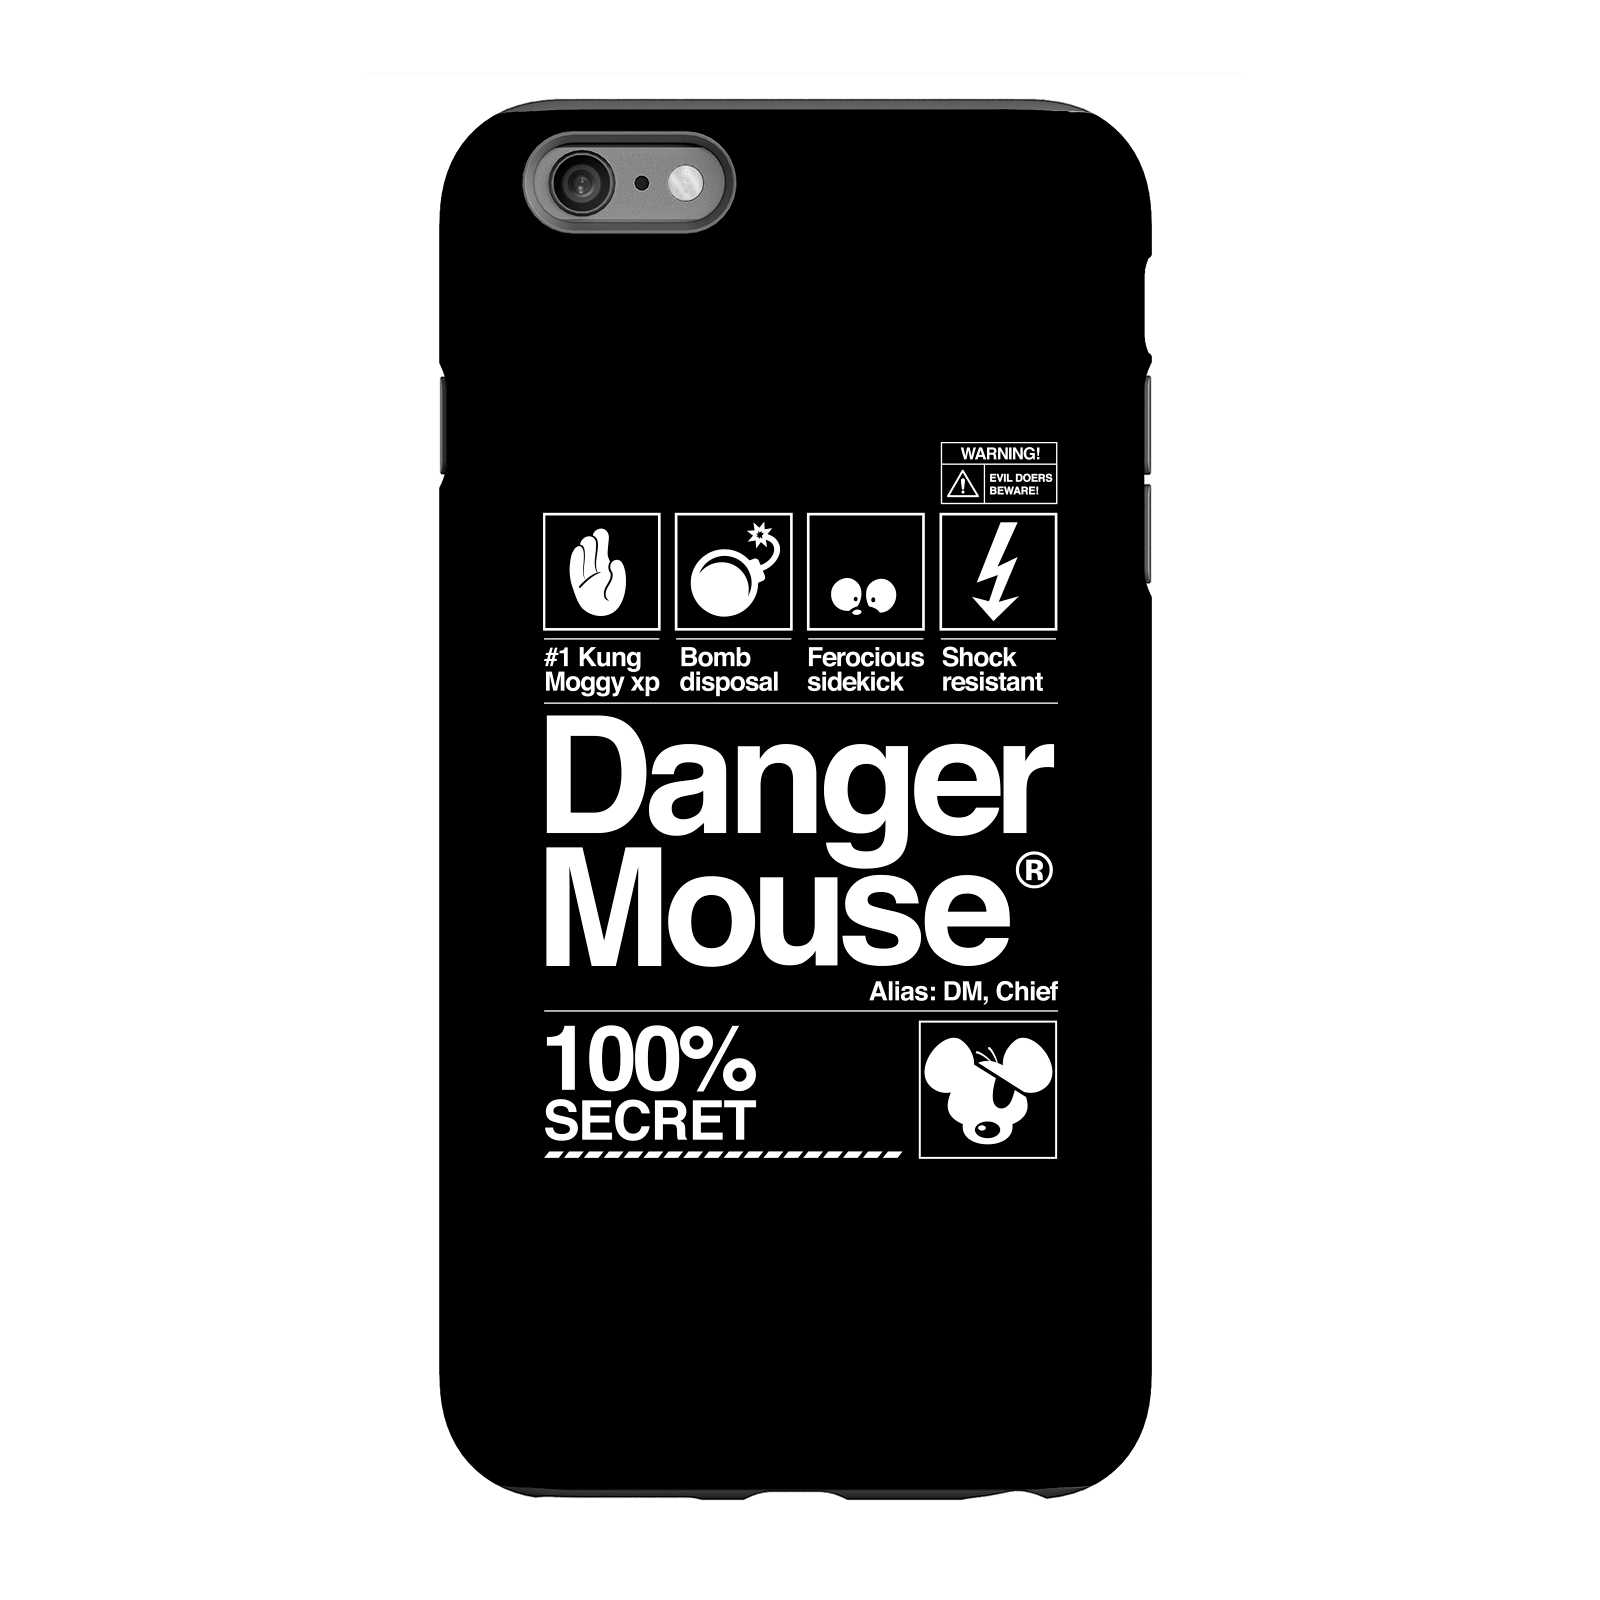 Danger Mouse 100% Secret Phone Case for iPhone and Android - iPhone 6 Plus - Tough Case - Gloss